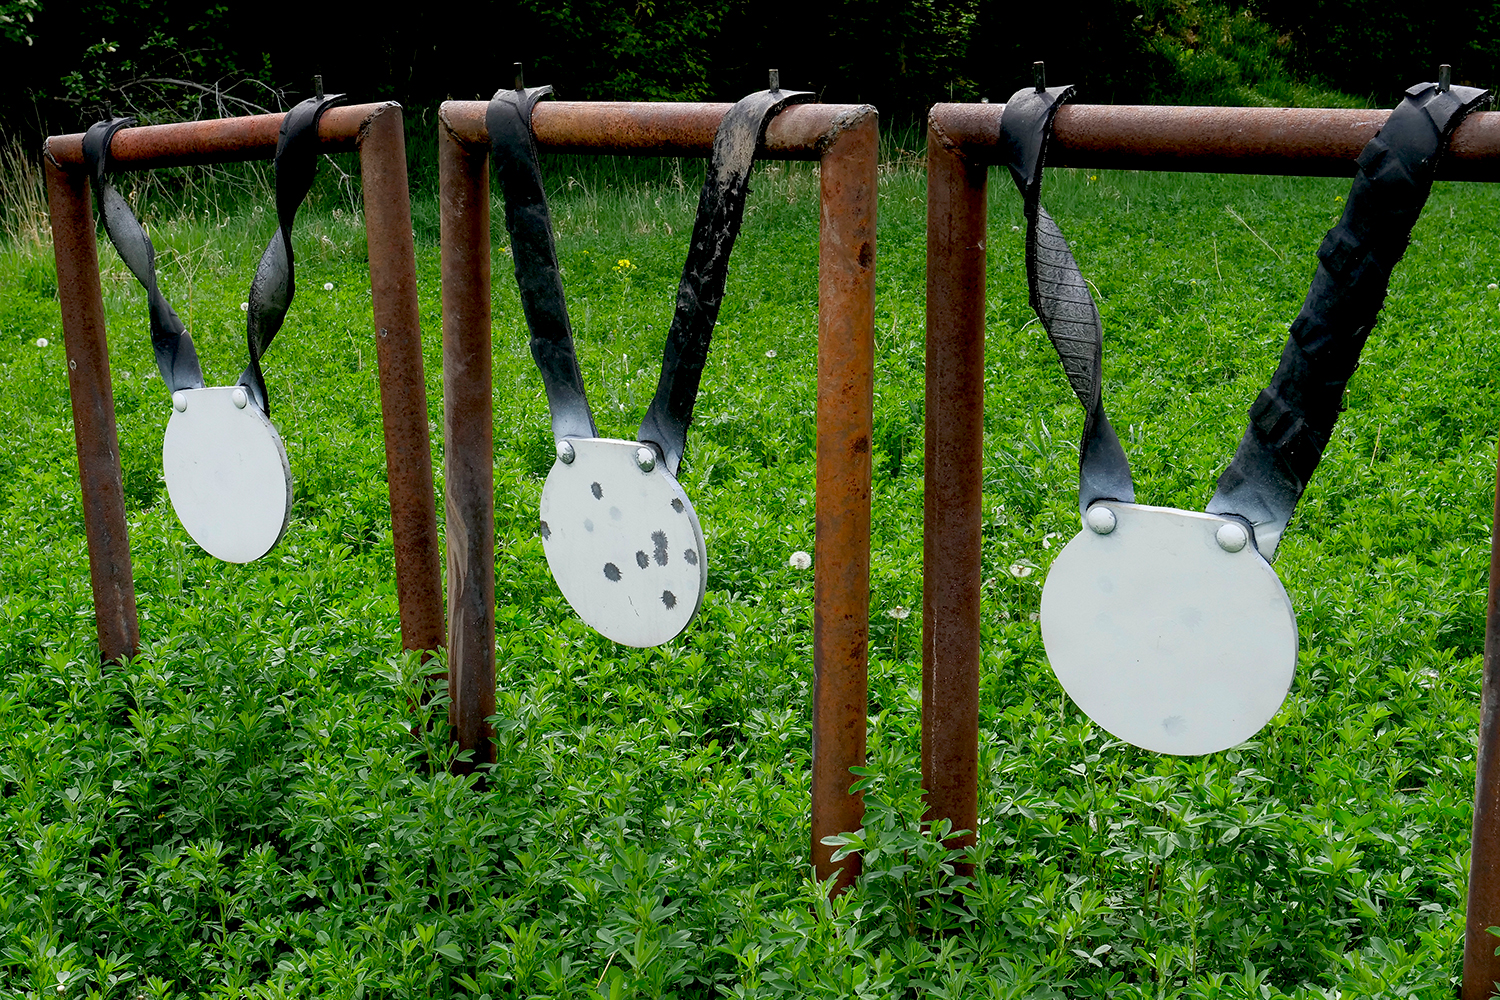 Three round metal plates hang from a metal framework to be used as shooting targets.